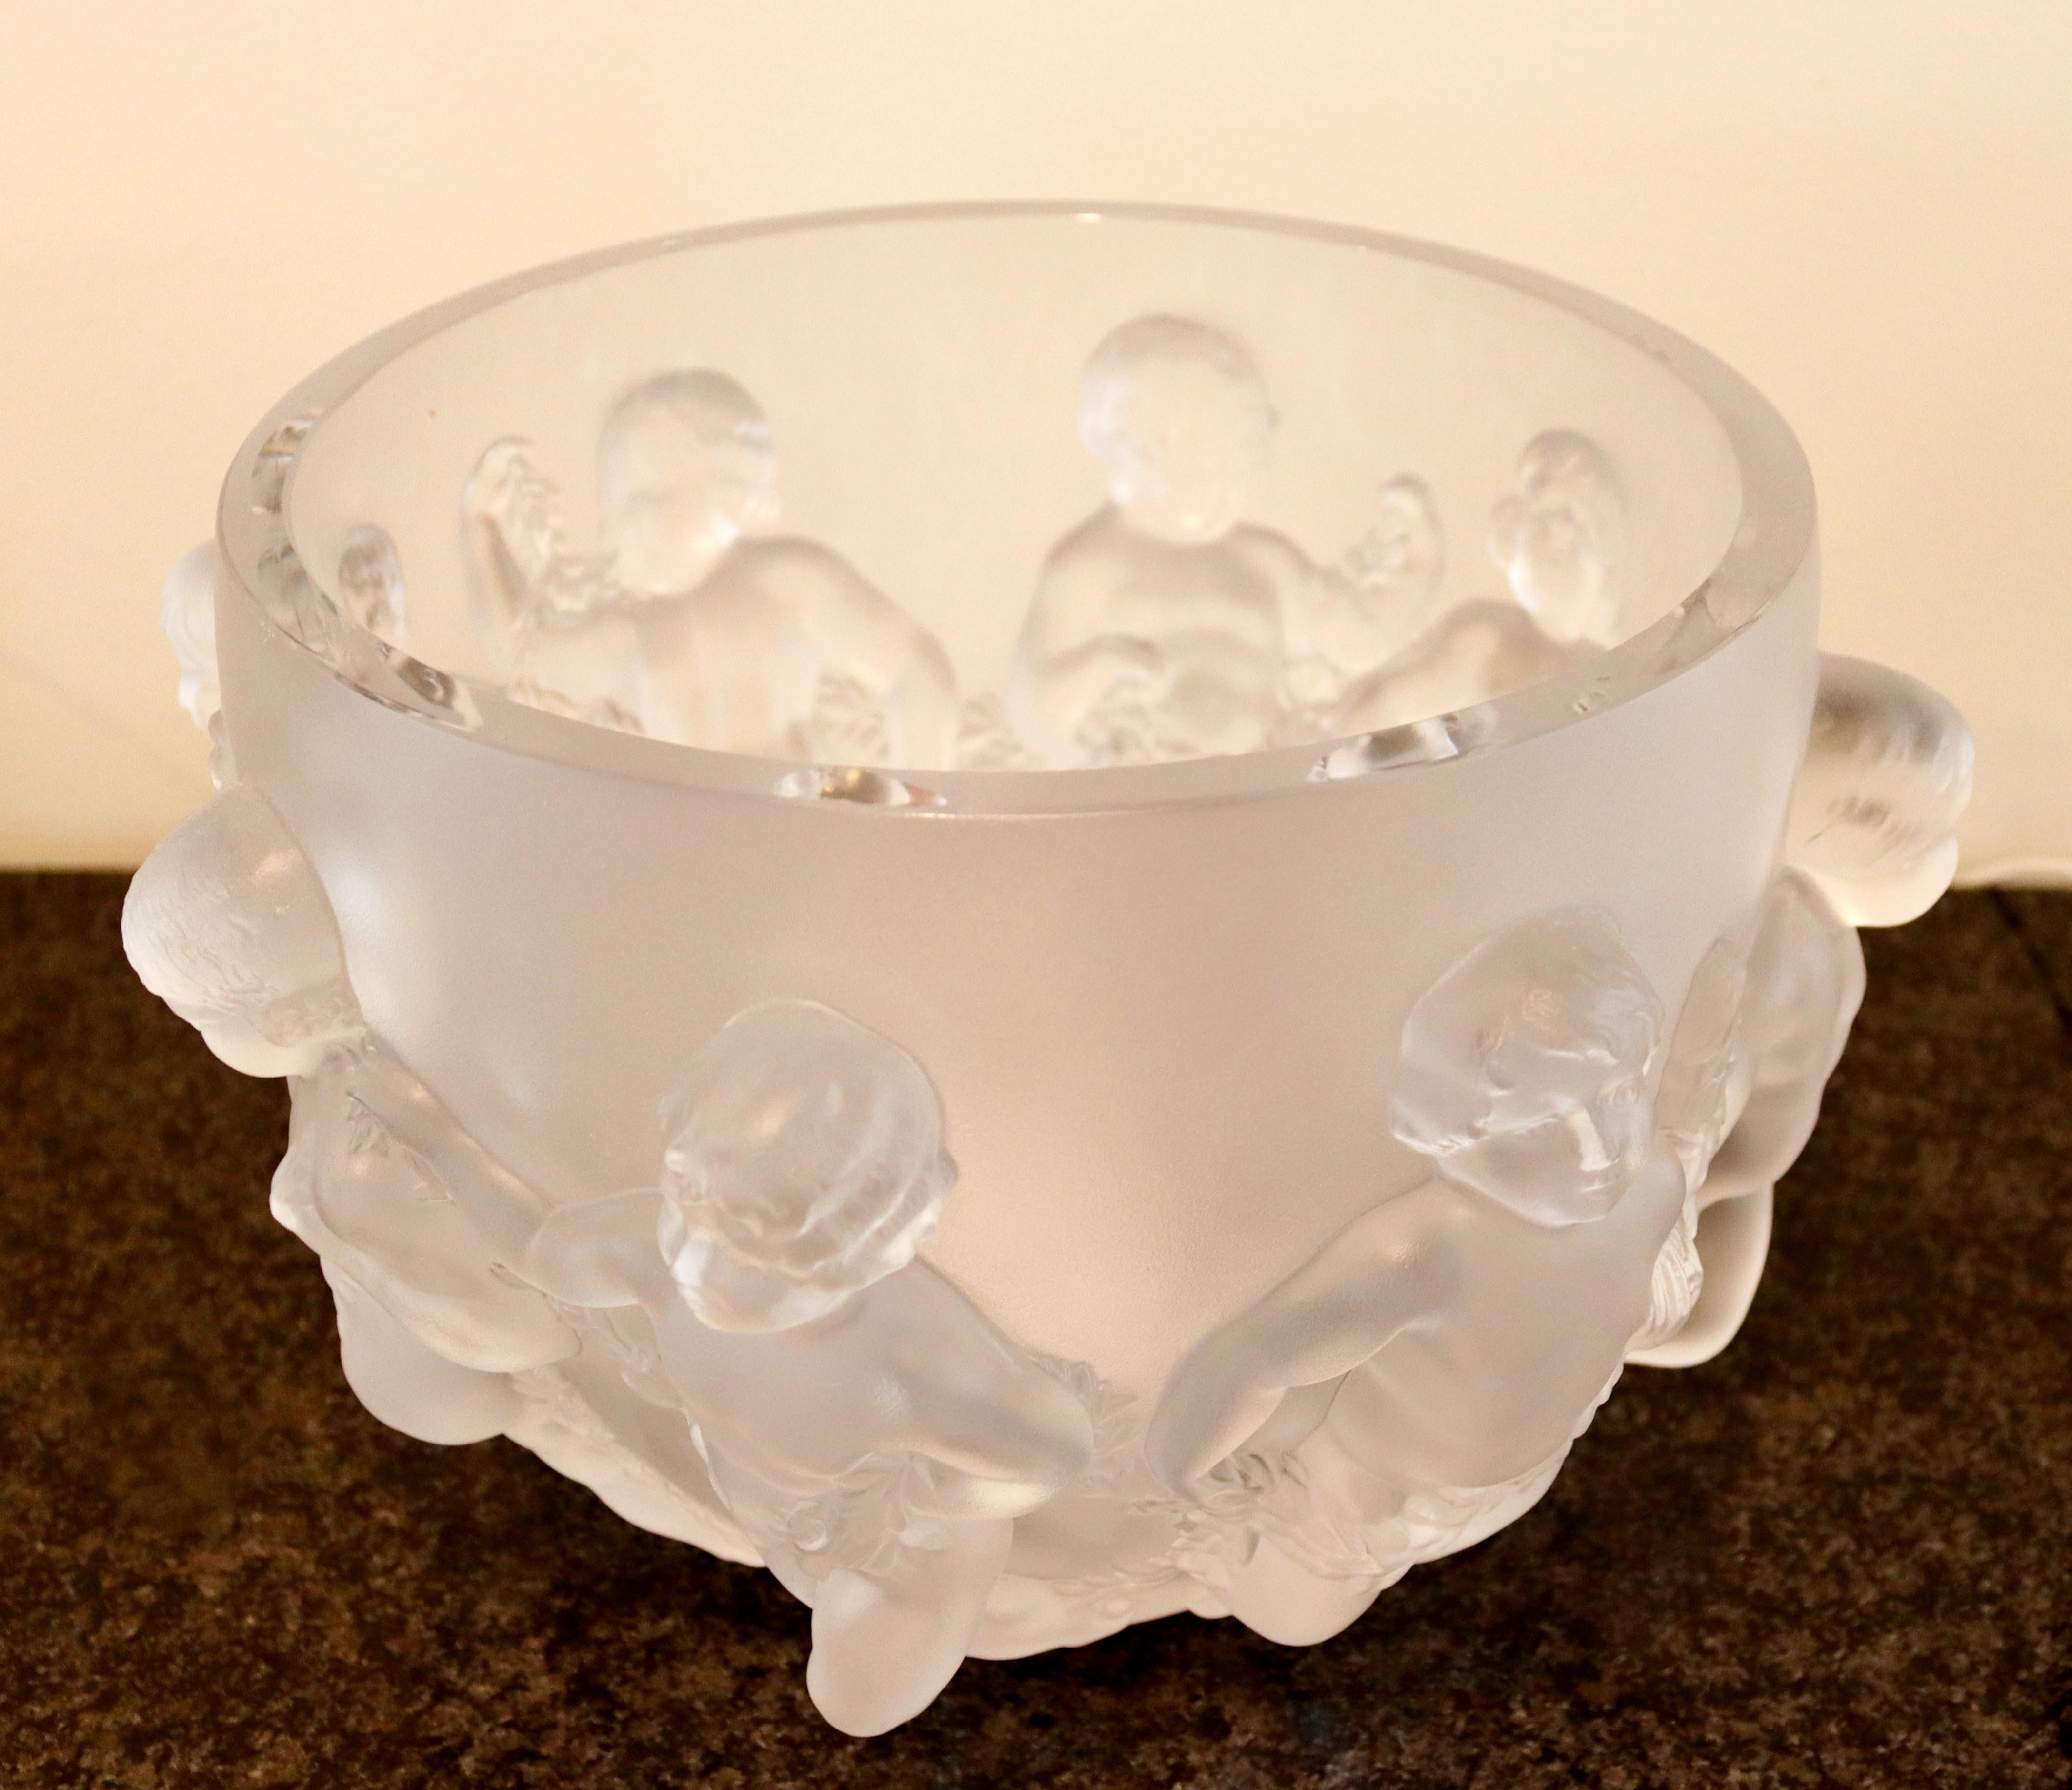 For your consideration is an incredible, crystal bowl called Luxemburg with cherubs engraved in the glass, signed Lalique Paris. In excellent condition. The dimensions are 12.5